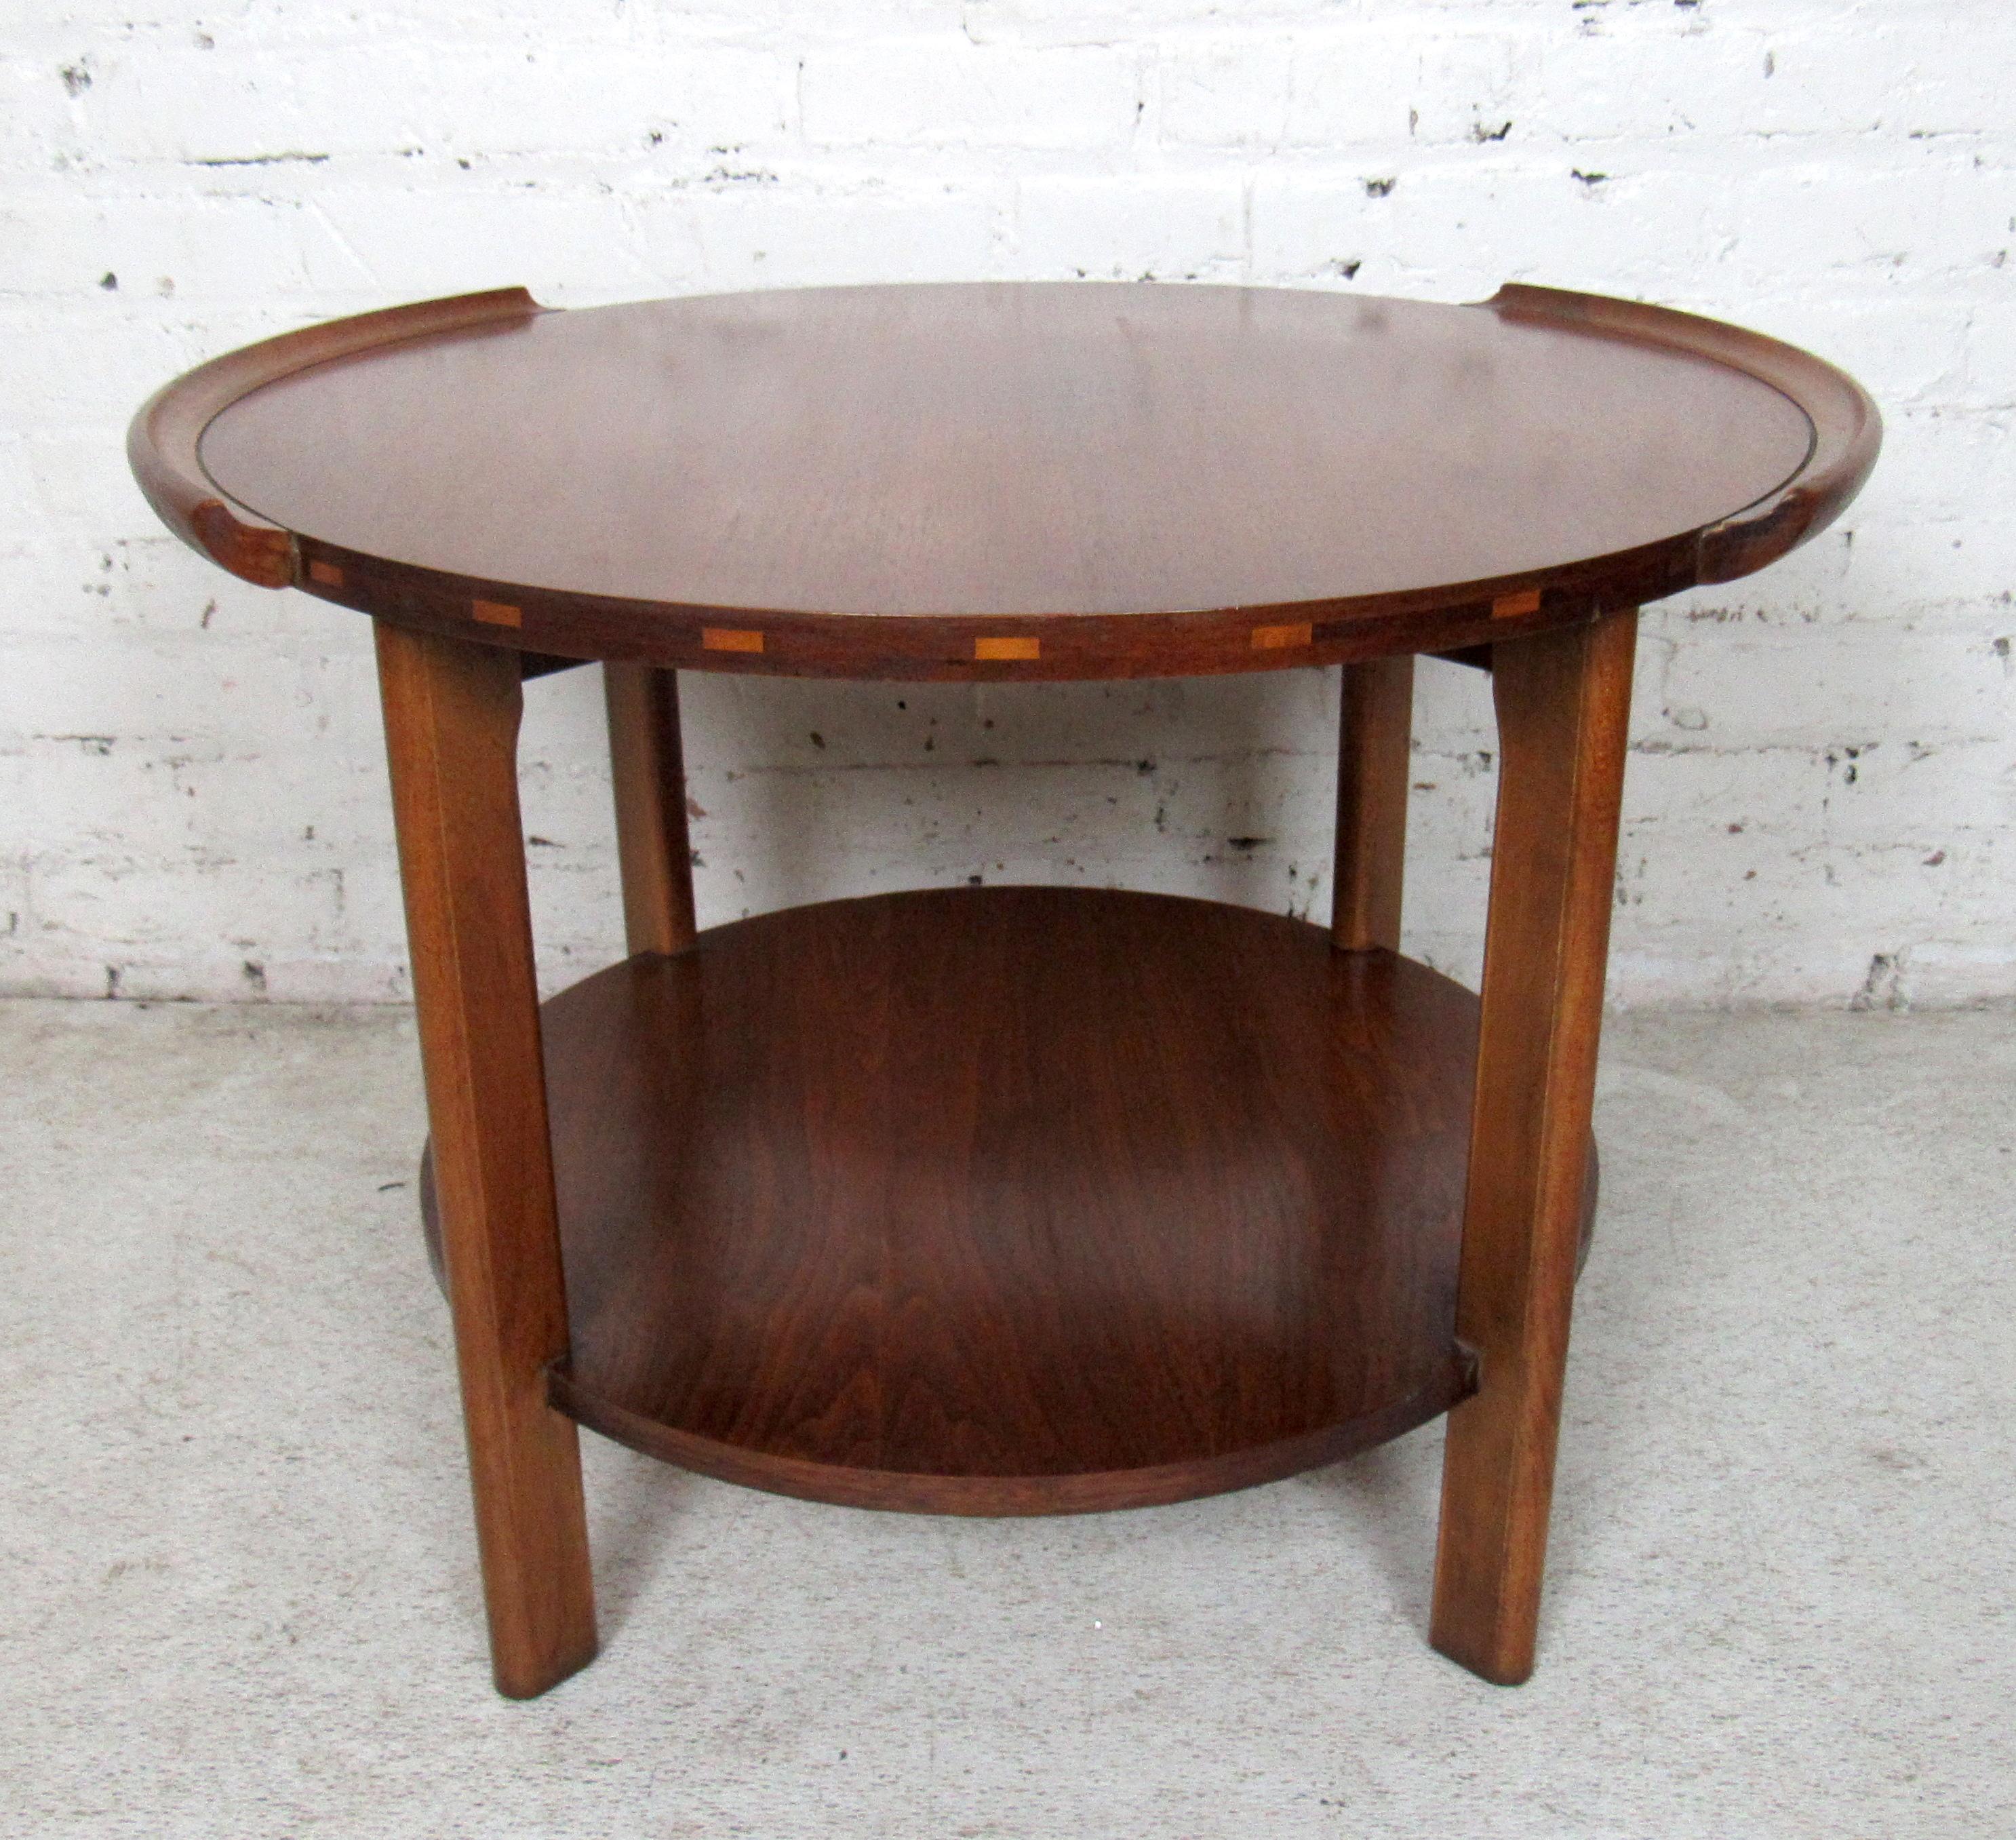 Mid-Century Modern round two-tier side table by Lane featured in rich walnut grain.

Please confirm item location with dealer (NJ or NY).
 